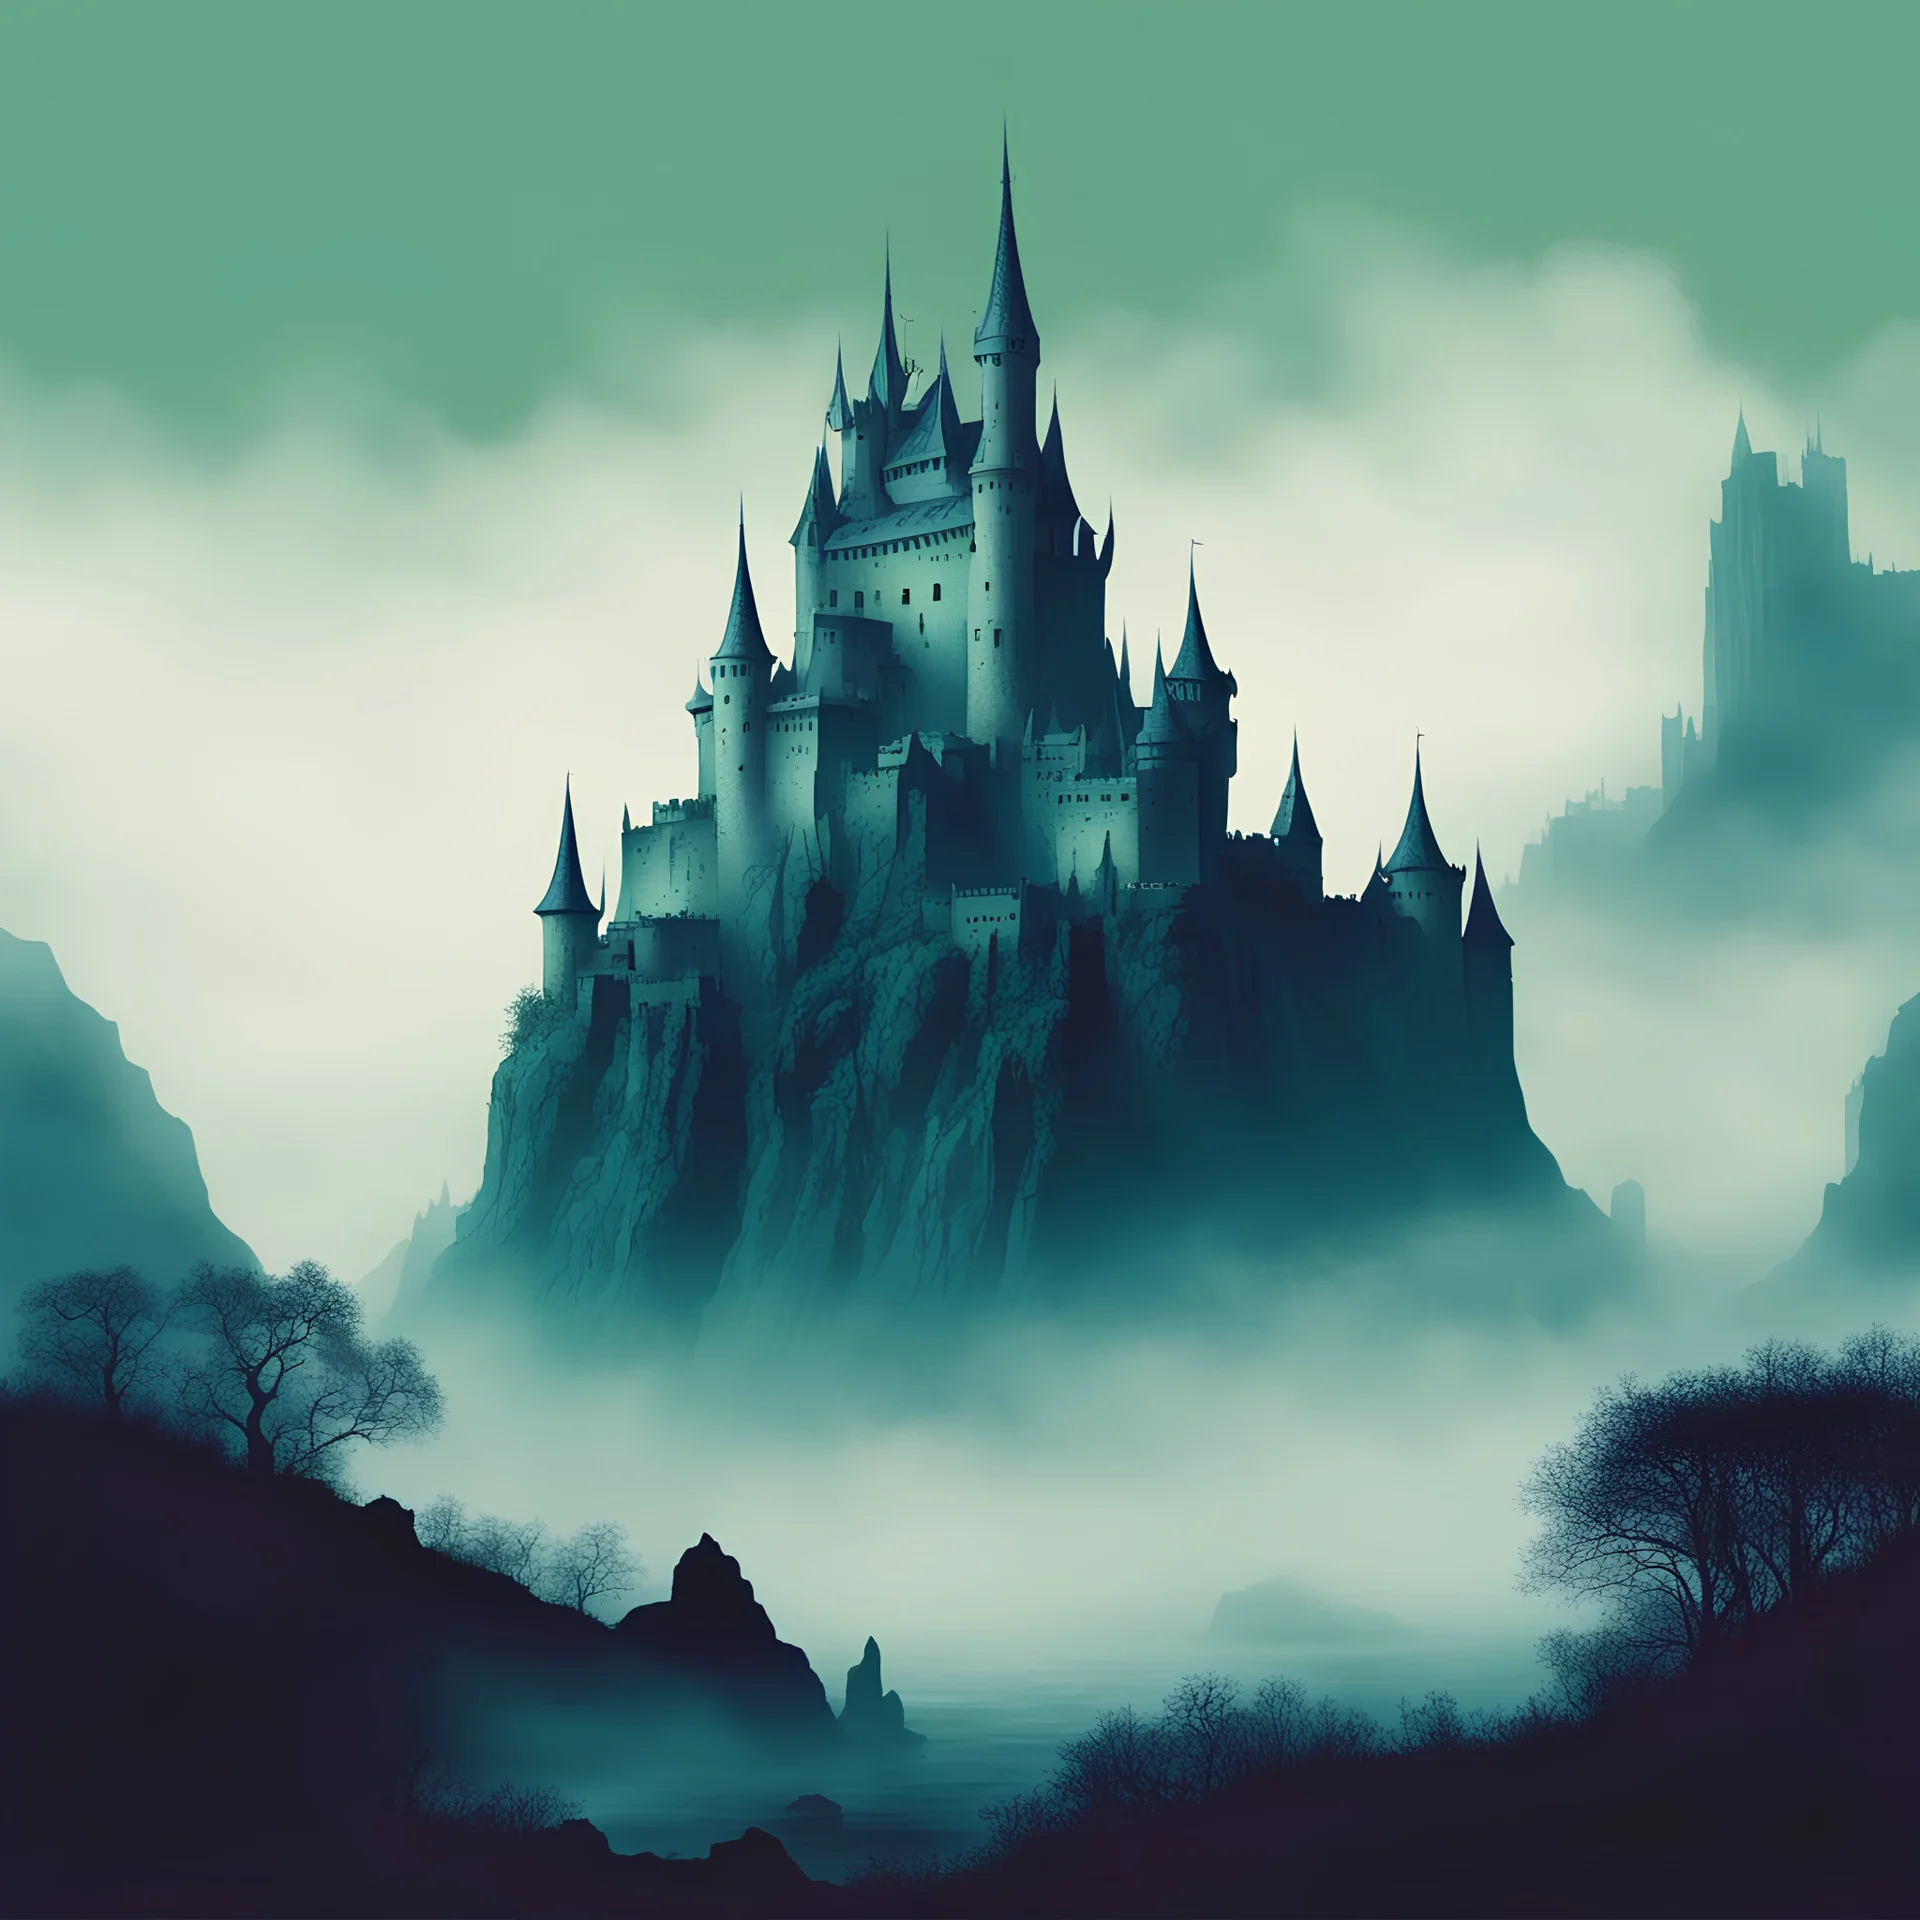 A elven castle in the mist undone and not fully formed in pop art style